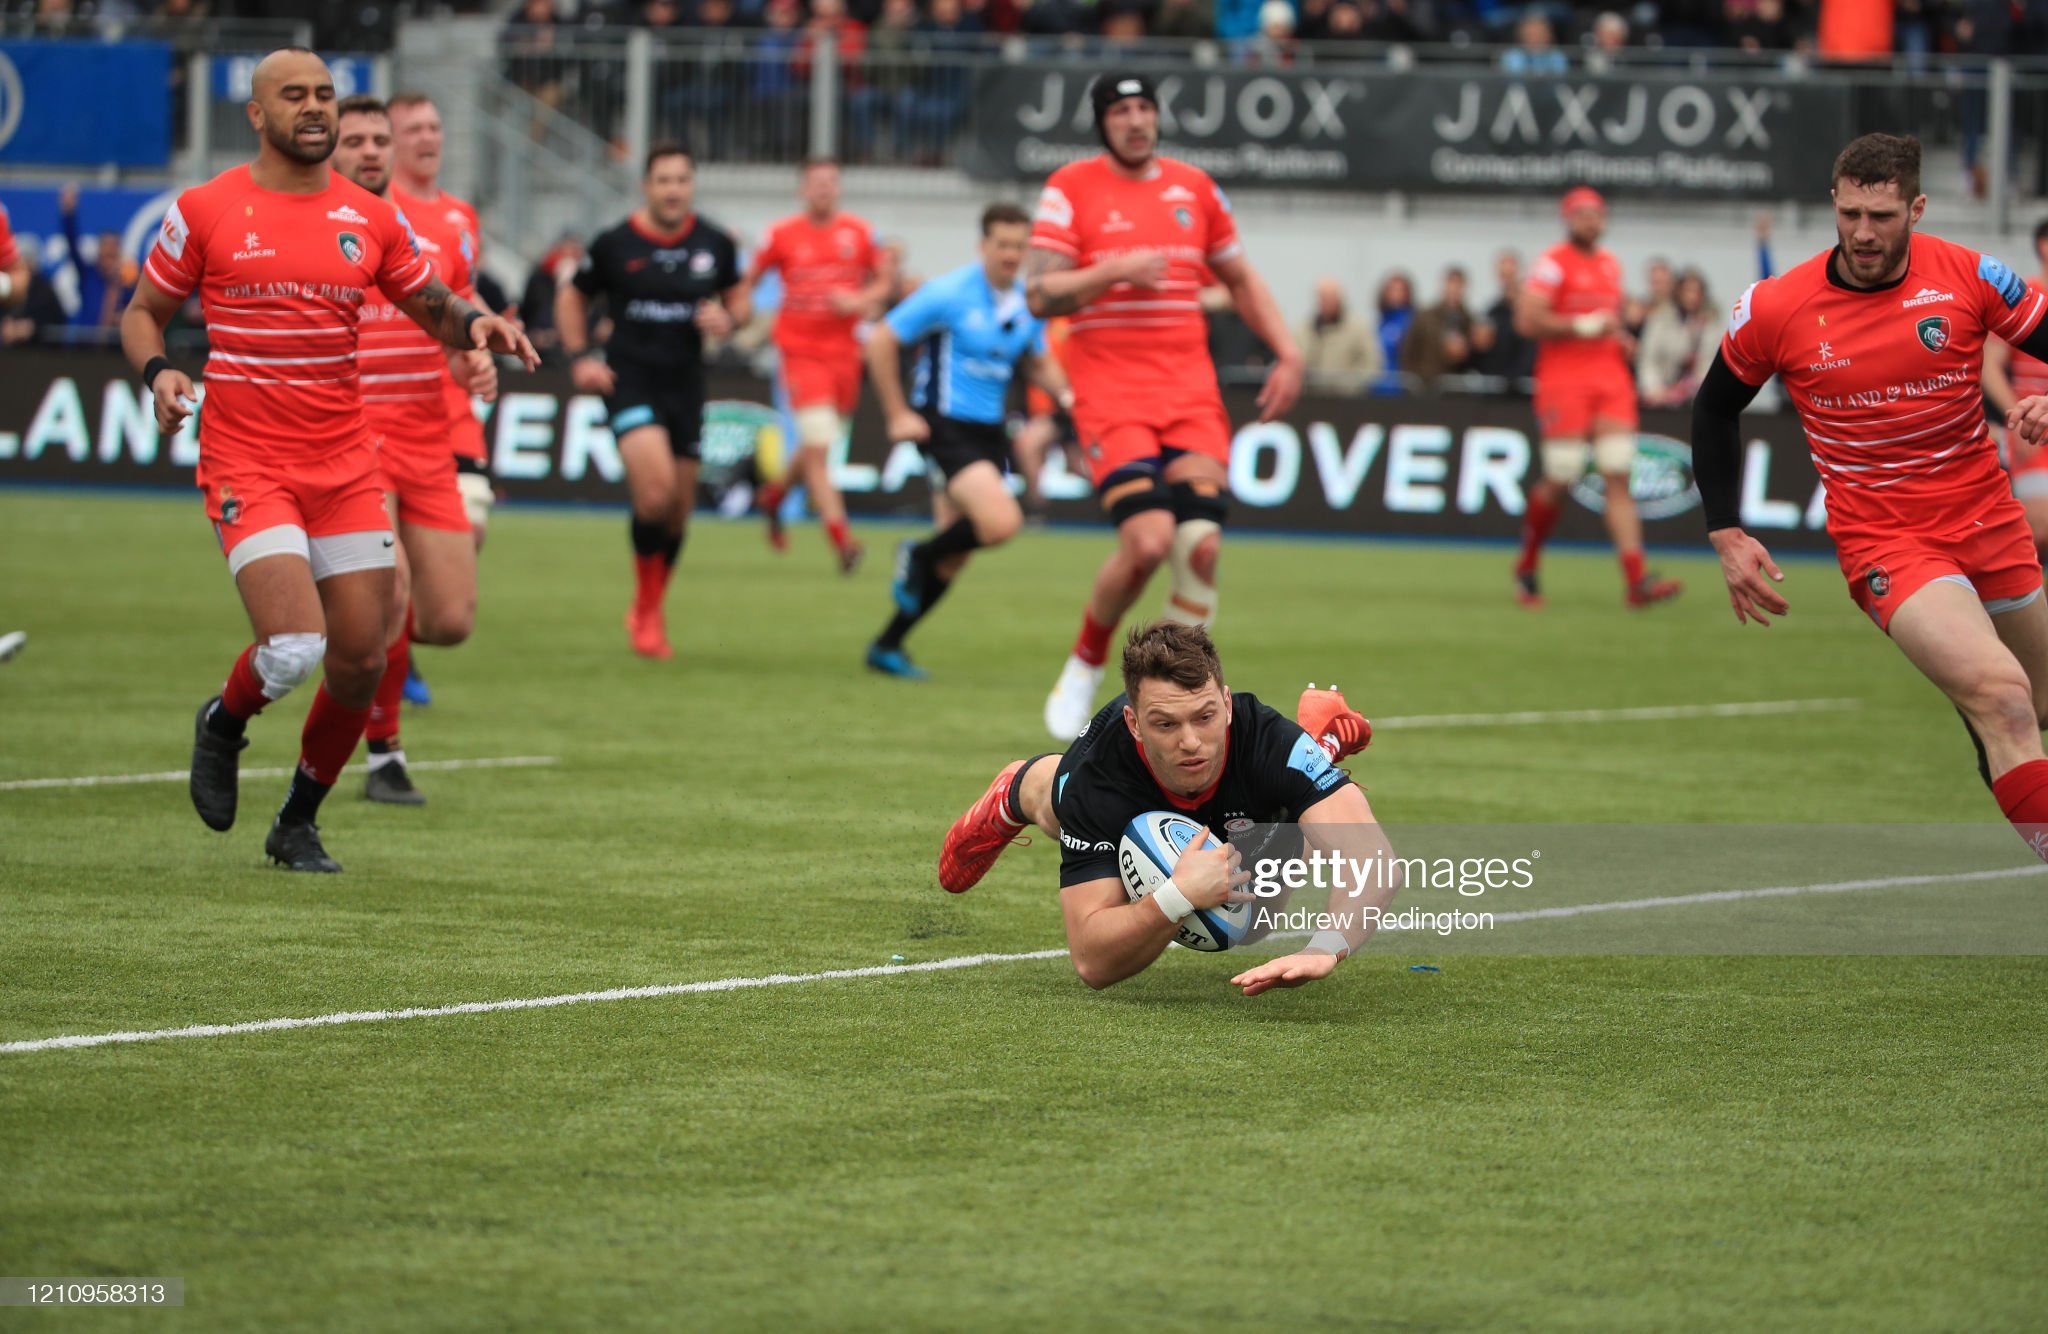 Saracens vs. Leicester Tigers Prediction, Betting Tips & Odds │5 MARCH, 2022